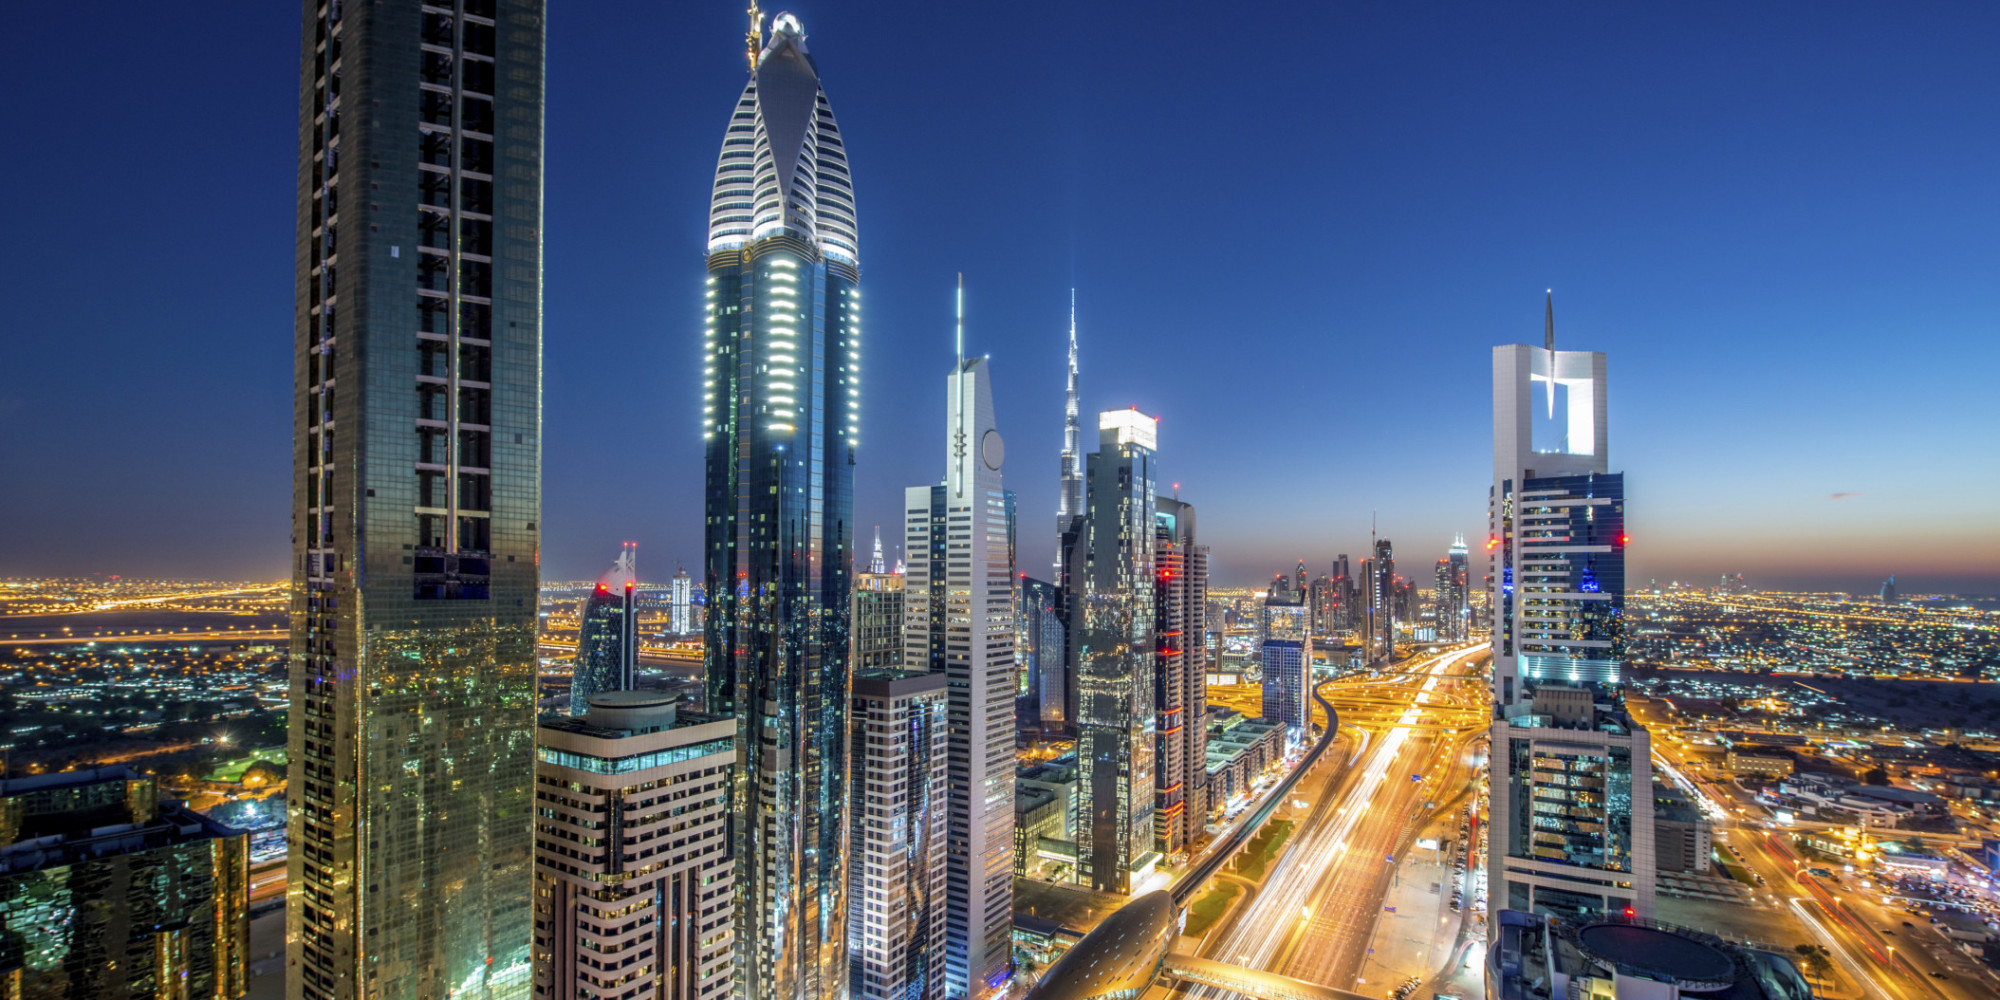 Dubai Hopes To Become Most Visited City In The World By 2020 | HuffPost